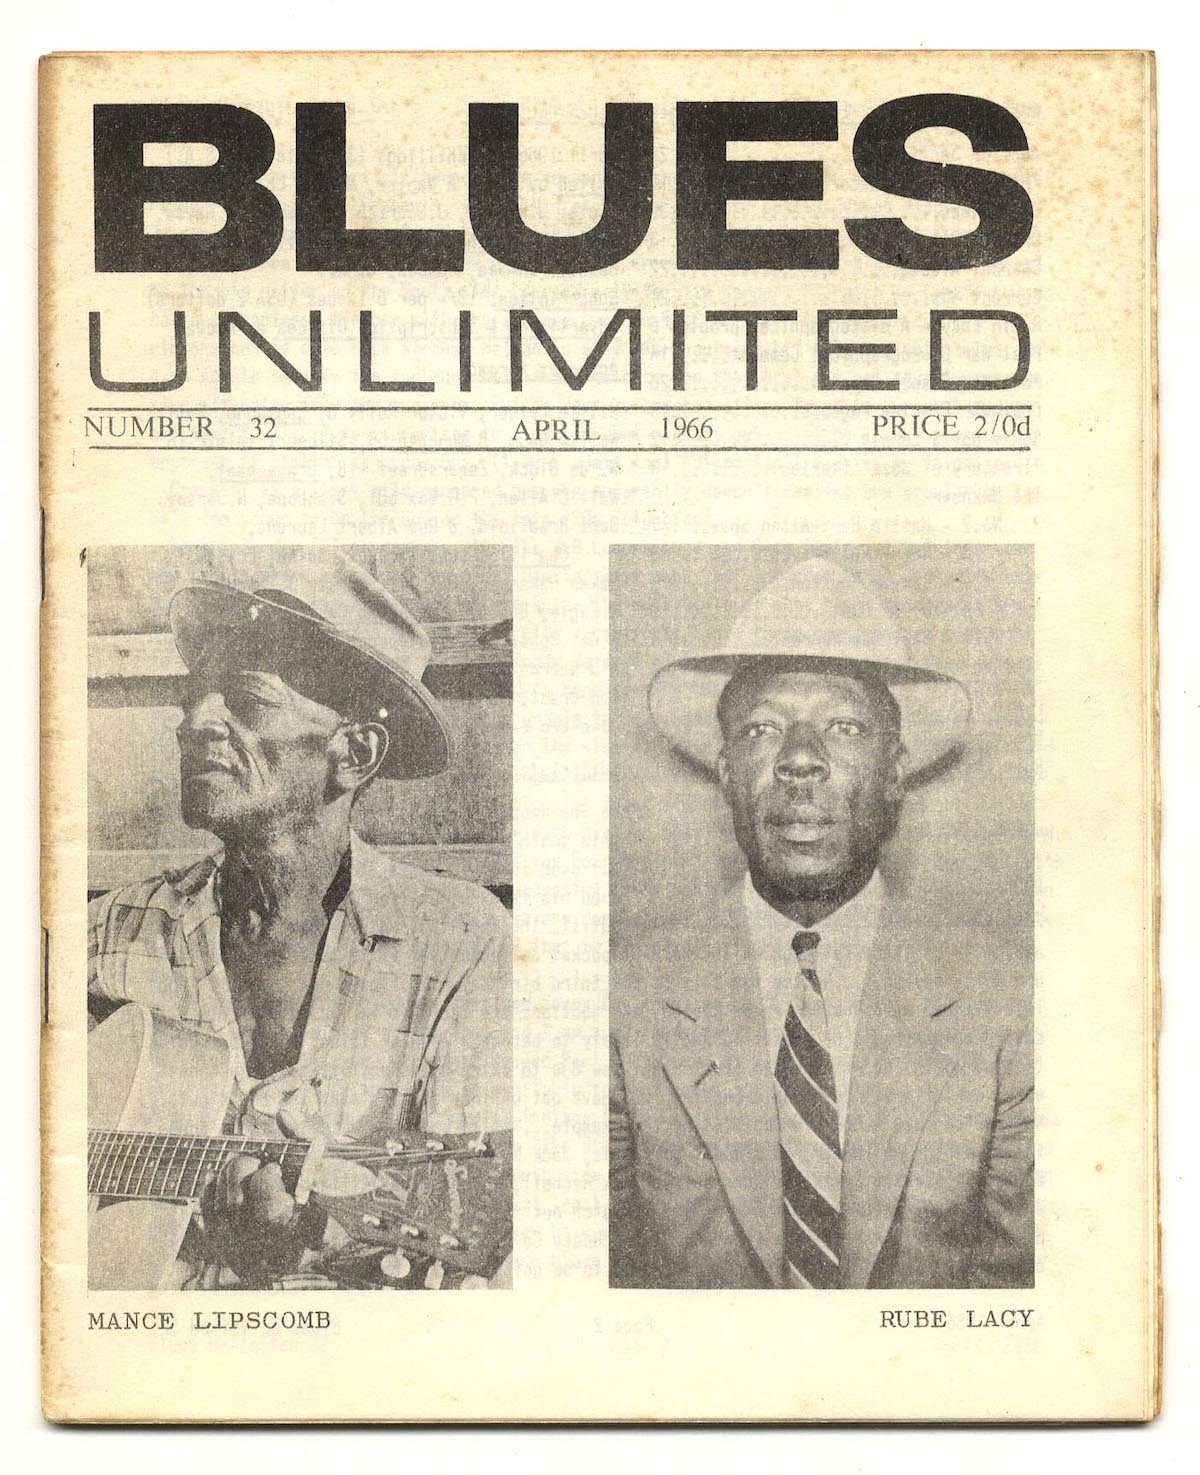 African American Music, African American Art, Blues Music, The Blues, Charlie Patton, Rubin Lacey, Son House, Howling Wolf, Muddy Waters, B.B. King, KOLUMN Magazine, KOLUMN, KINDR'D Magazine, KINDR'D